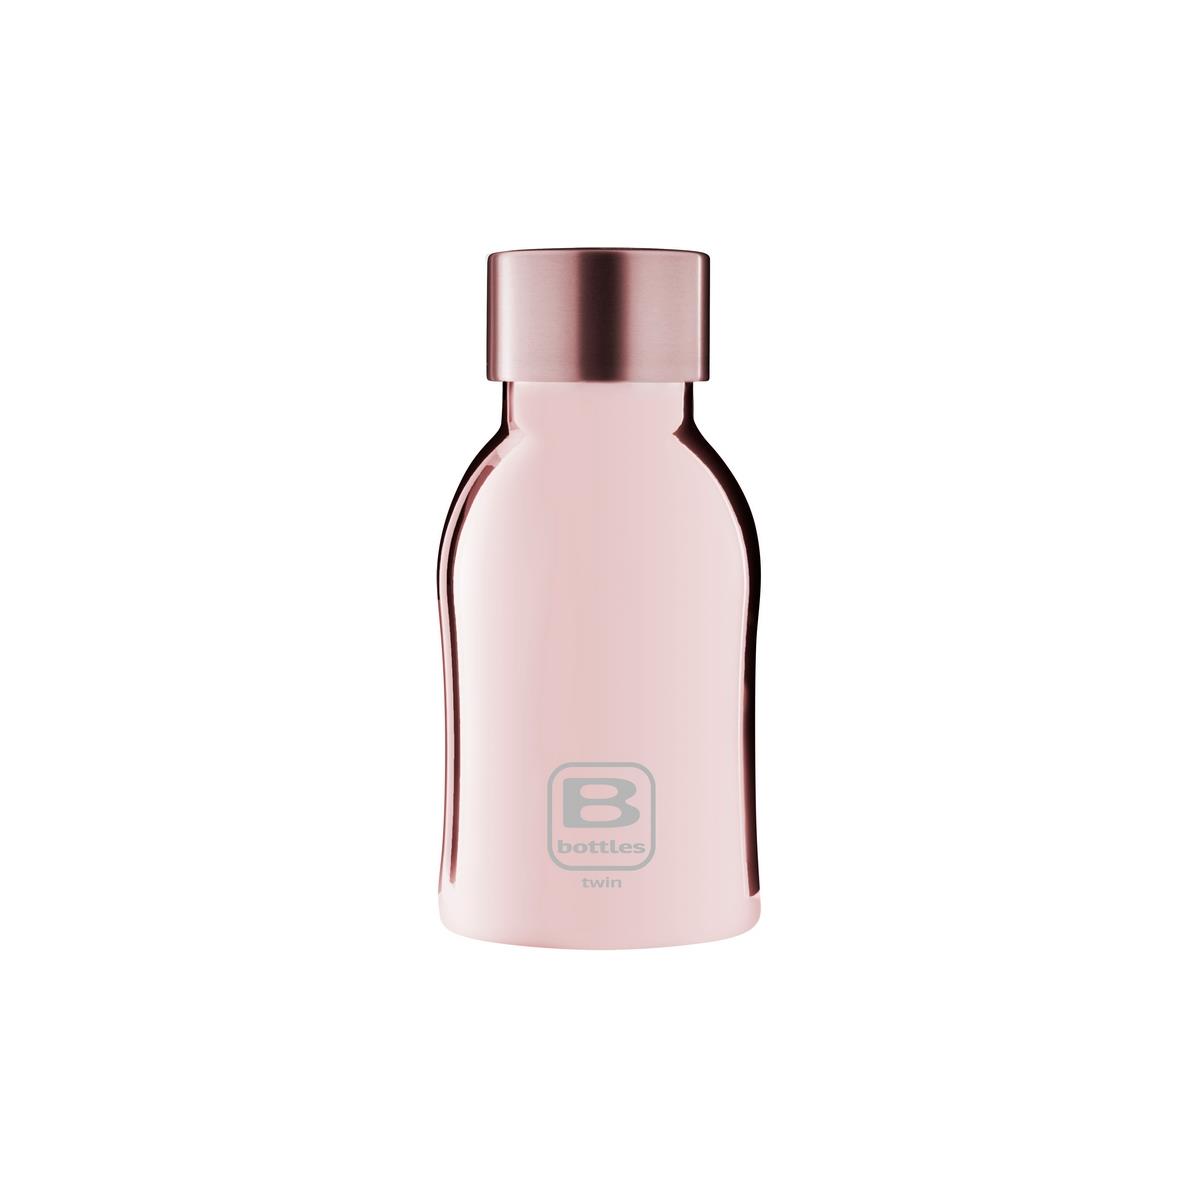 photo B Bottles Twin - Rose Gold Lux ??- 250 ml - Double wall thermal bottle in 18/10 stainless steel